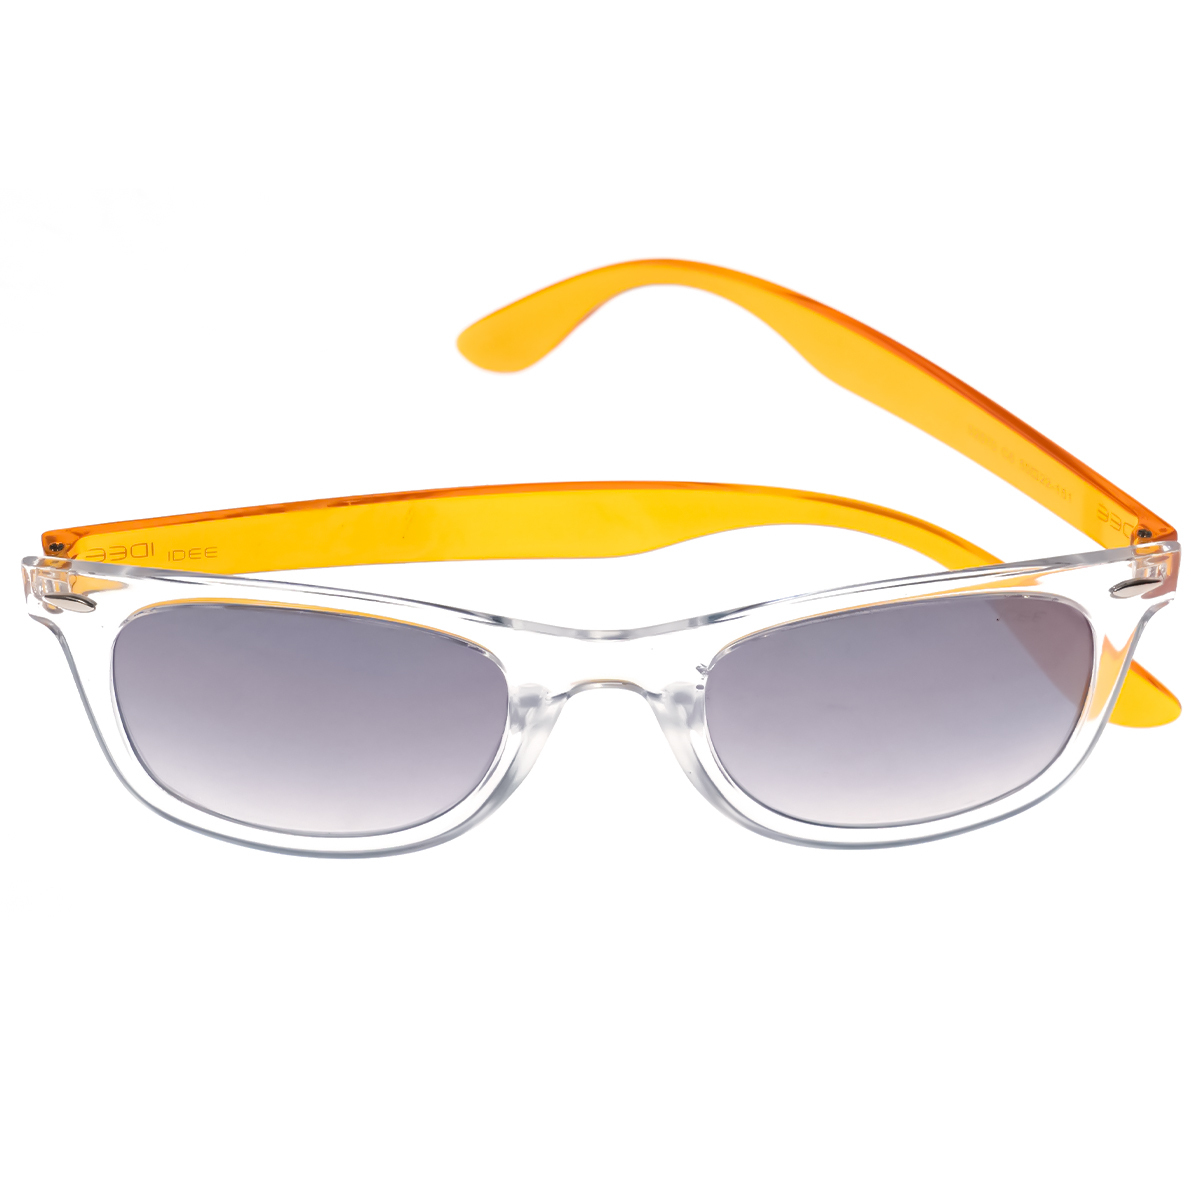 Idee Mens Shiny Crystal-Shiny Light Gold Part Frame With White Mirror Lens Sunglass